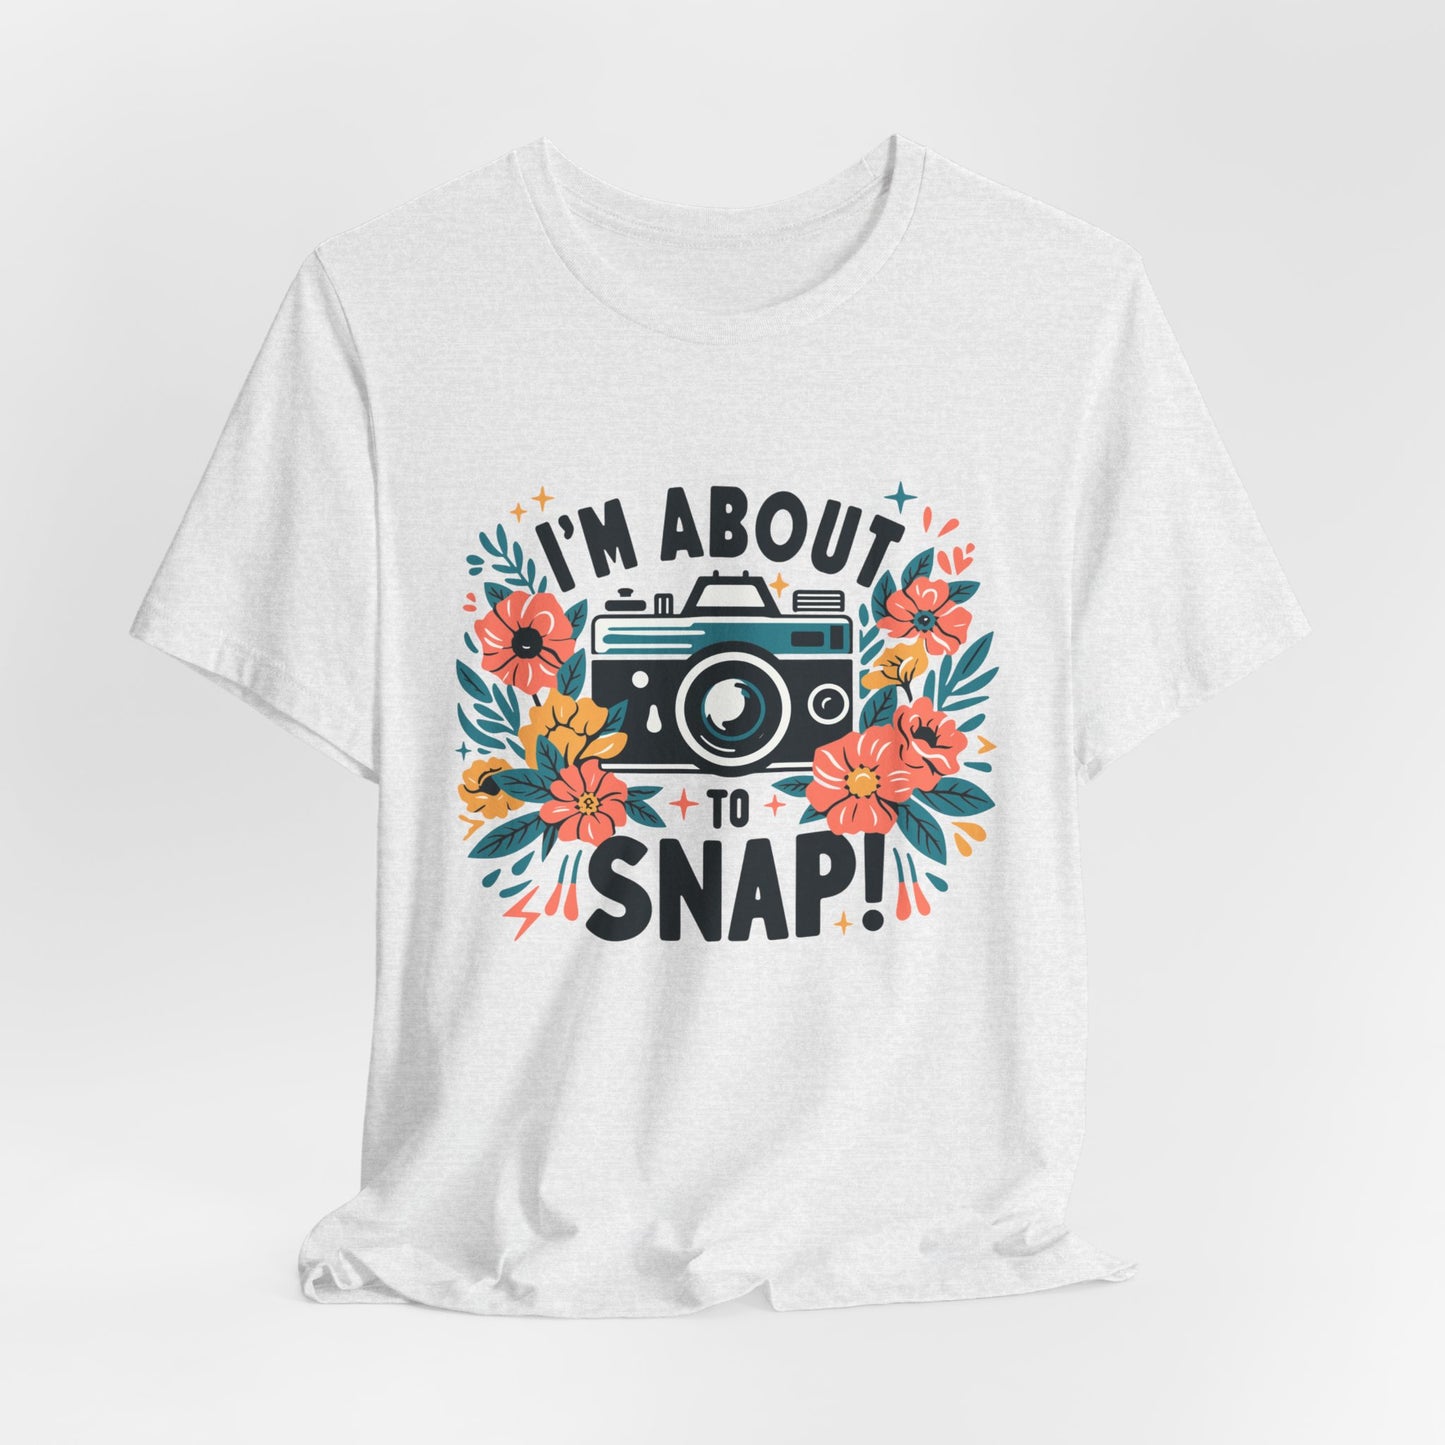 About to Snap Photographer Women's Funny Short Sleeve Tshirt